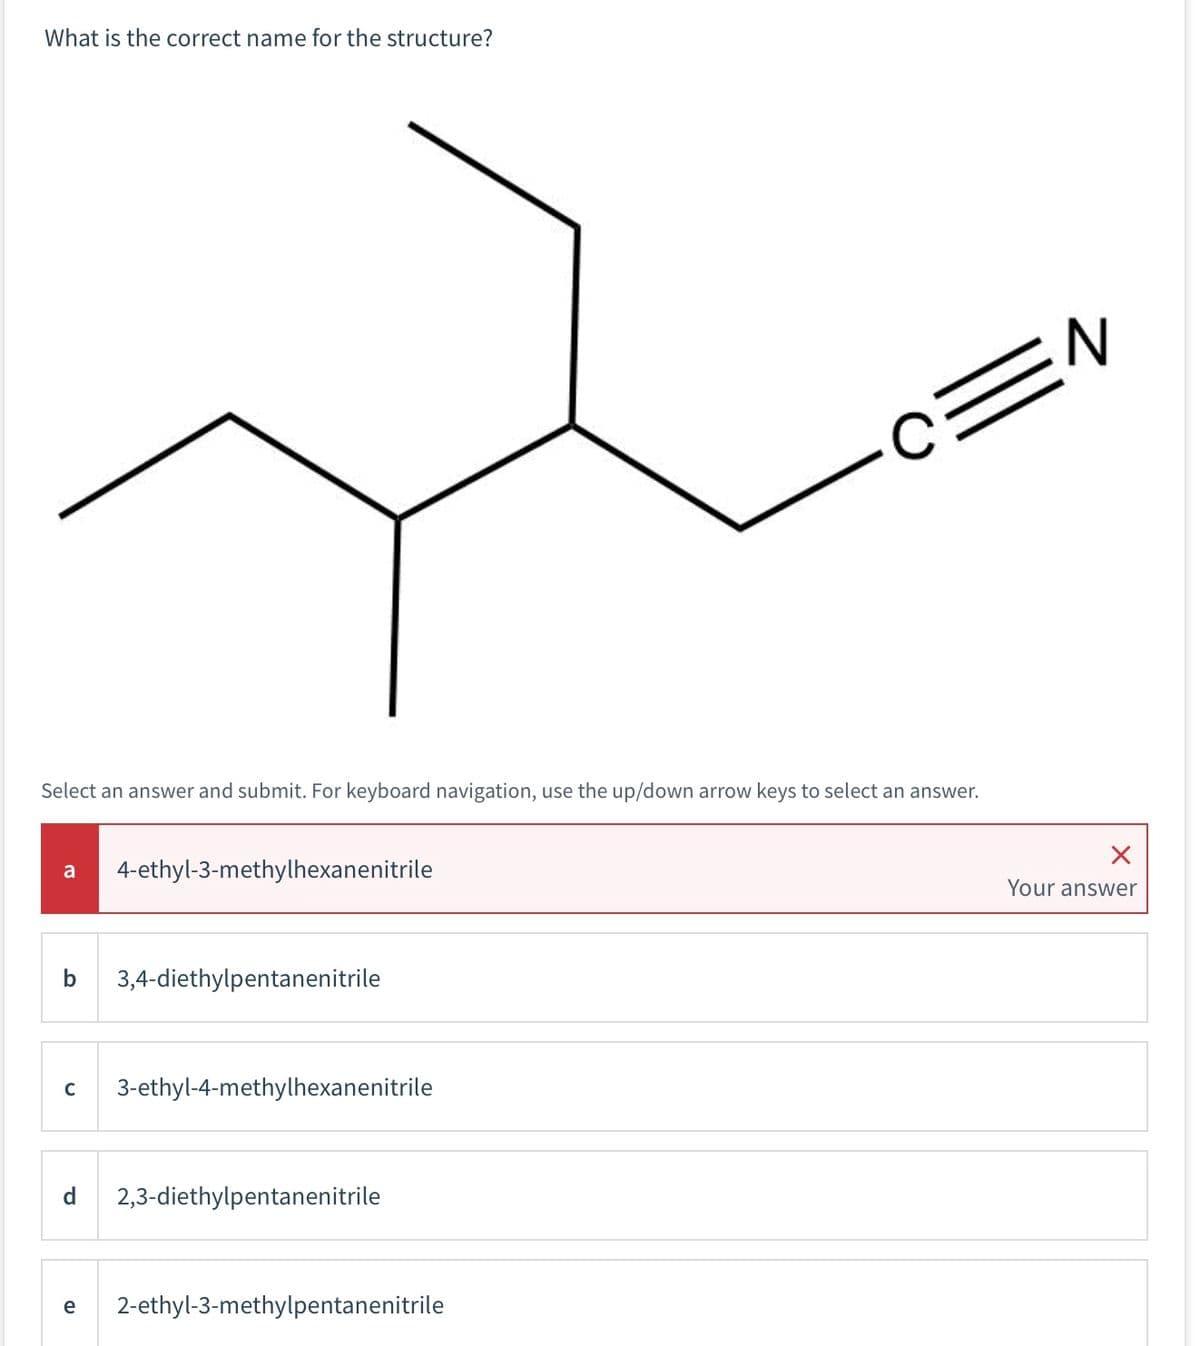 What is the correct name for the structure?
Select an answer and submit. For keyboard navigation, use the up/down arrow keys to select an answer.
a
4-ethyl-3-methylhexanenitrile
b 3,4-diethylpentanenitrile
C 3-ethyl-4-methylhexanenitrile
d 2,3-diethylpentanenitrile
C=N
e 2-ethyl-3-methylpentanenitrile
Your answer